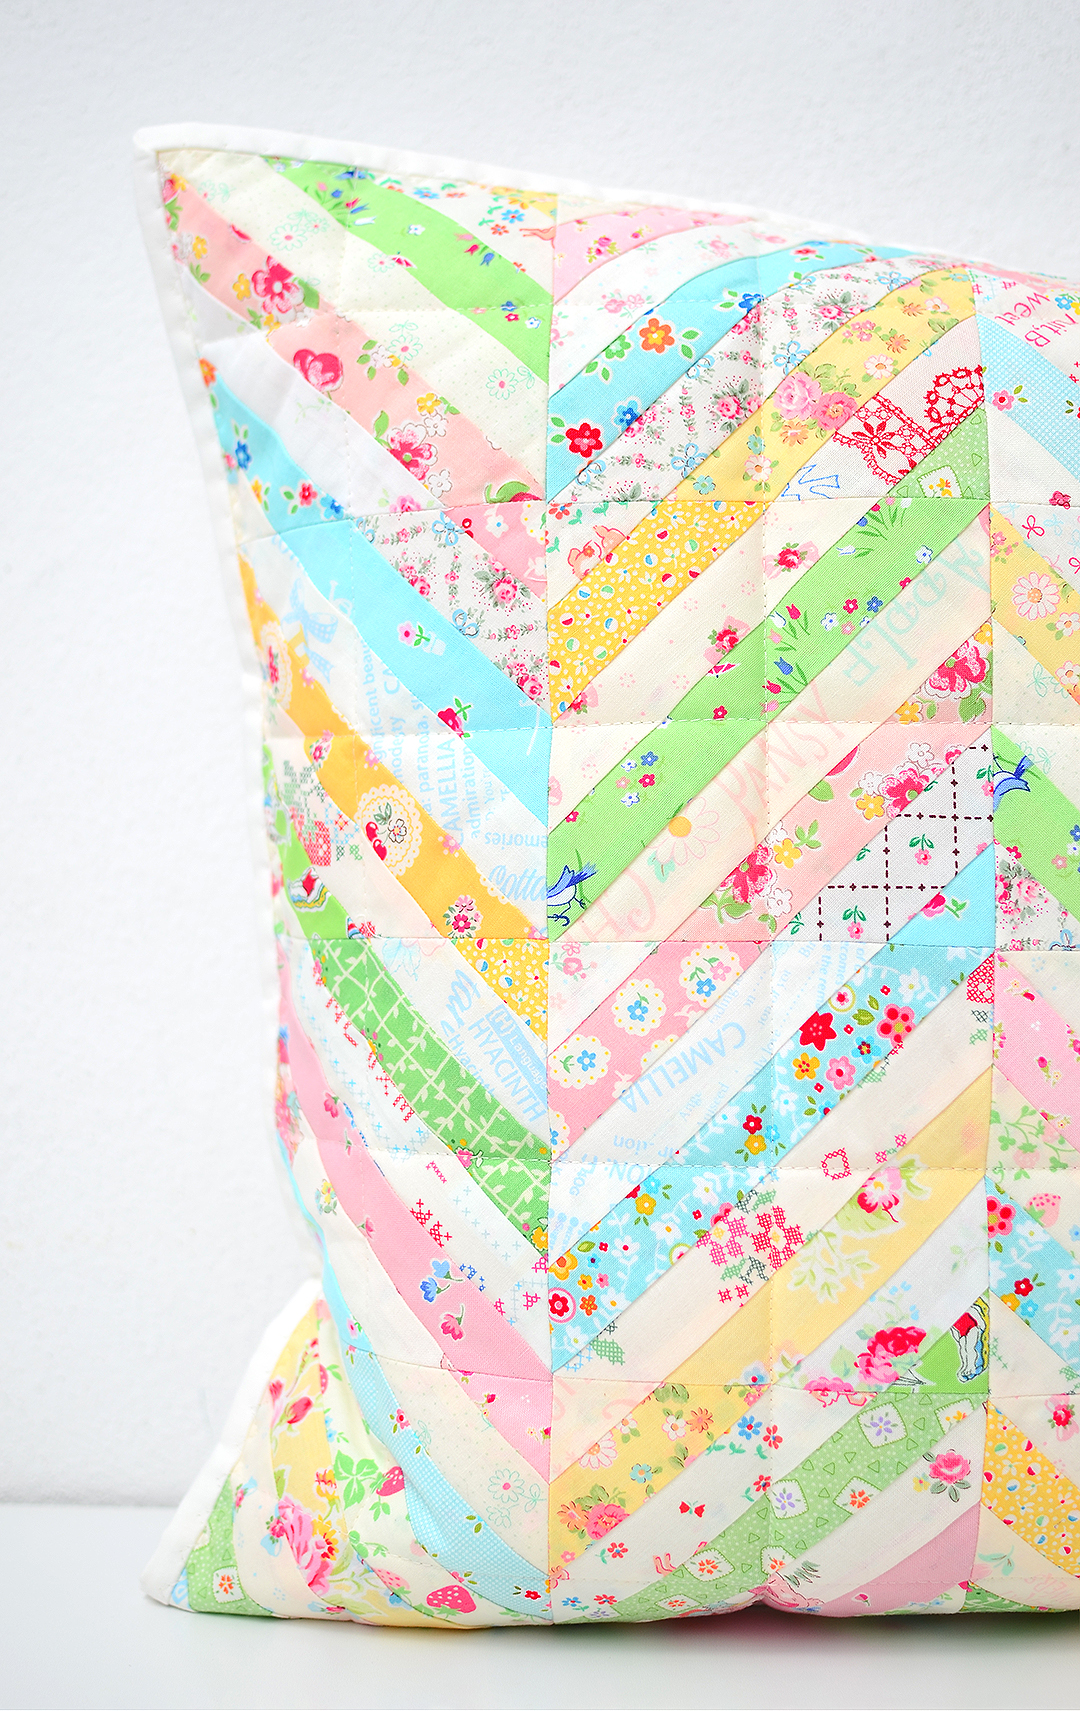 Foundation paper pieced Herringbone quilted pillow